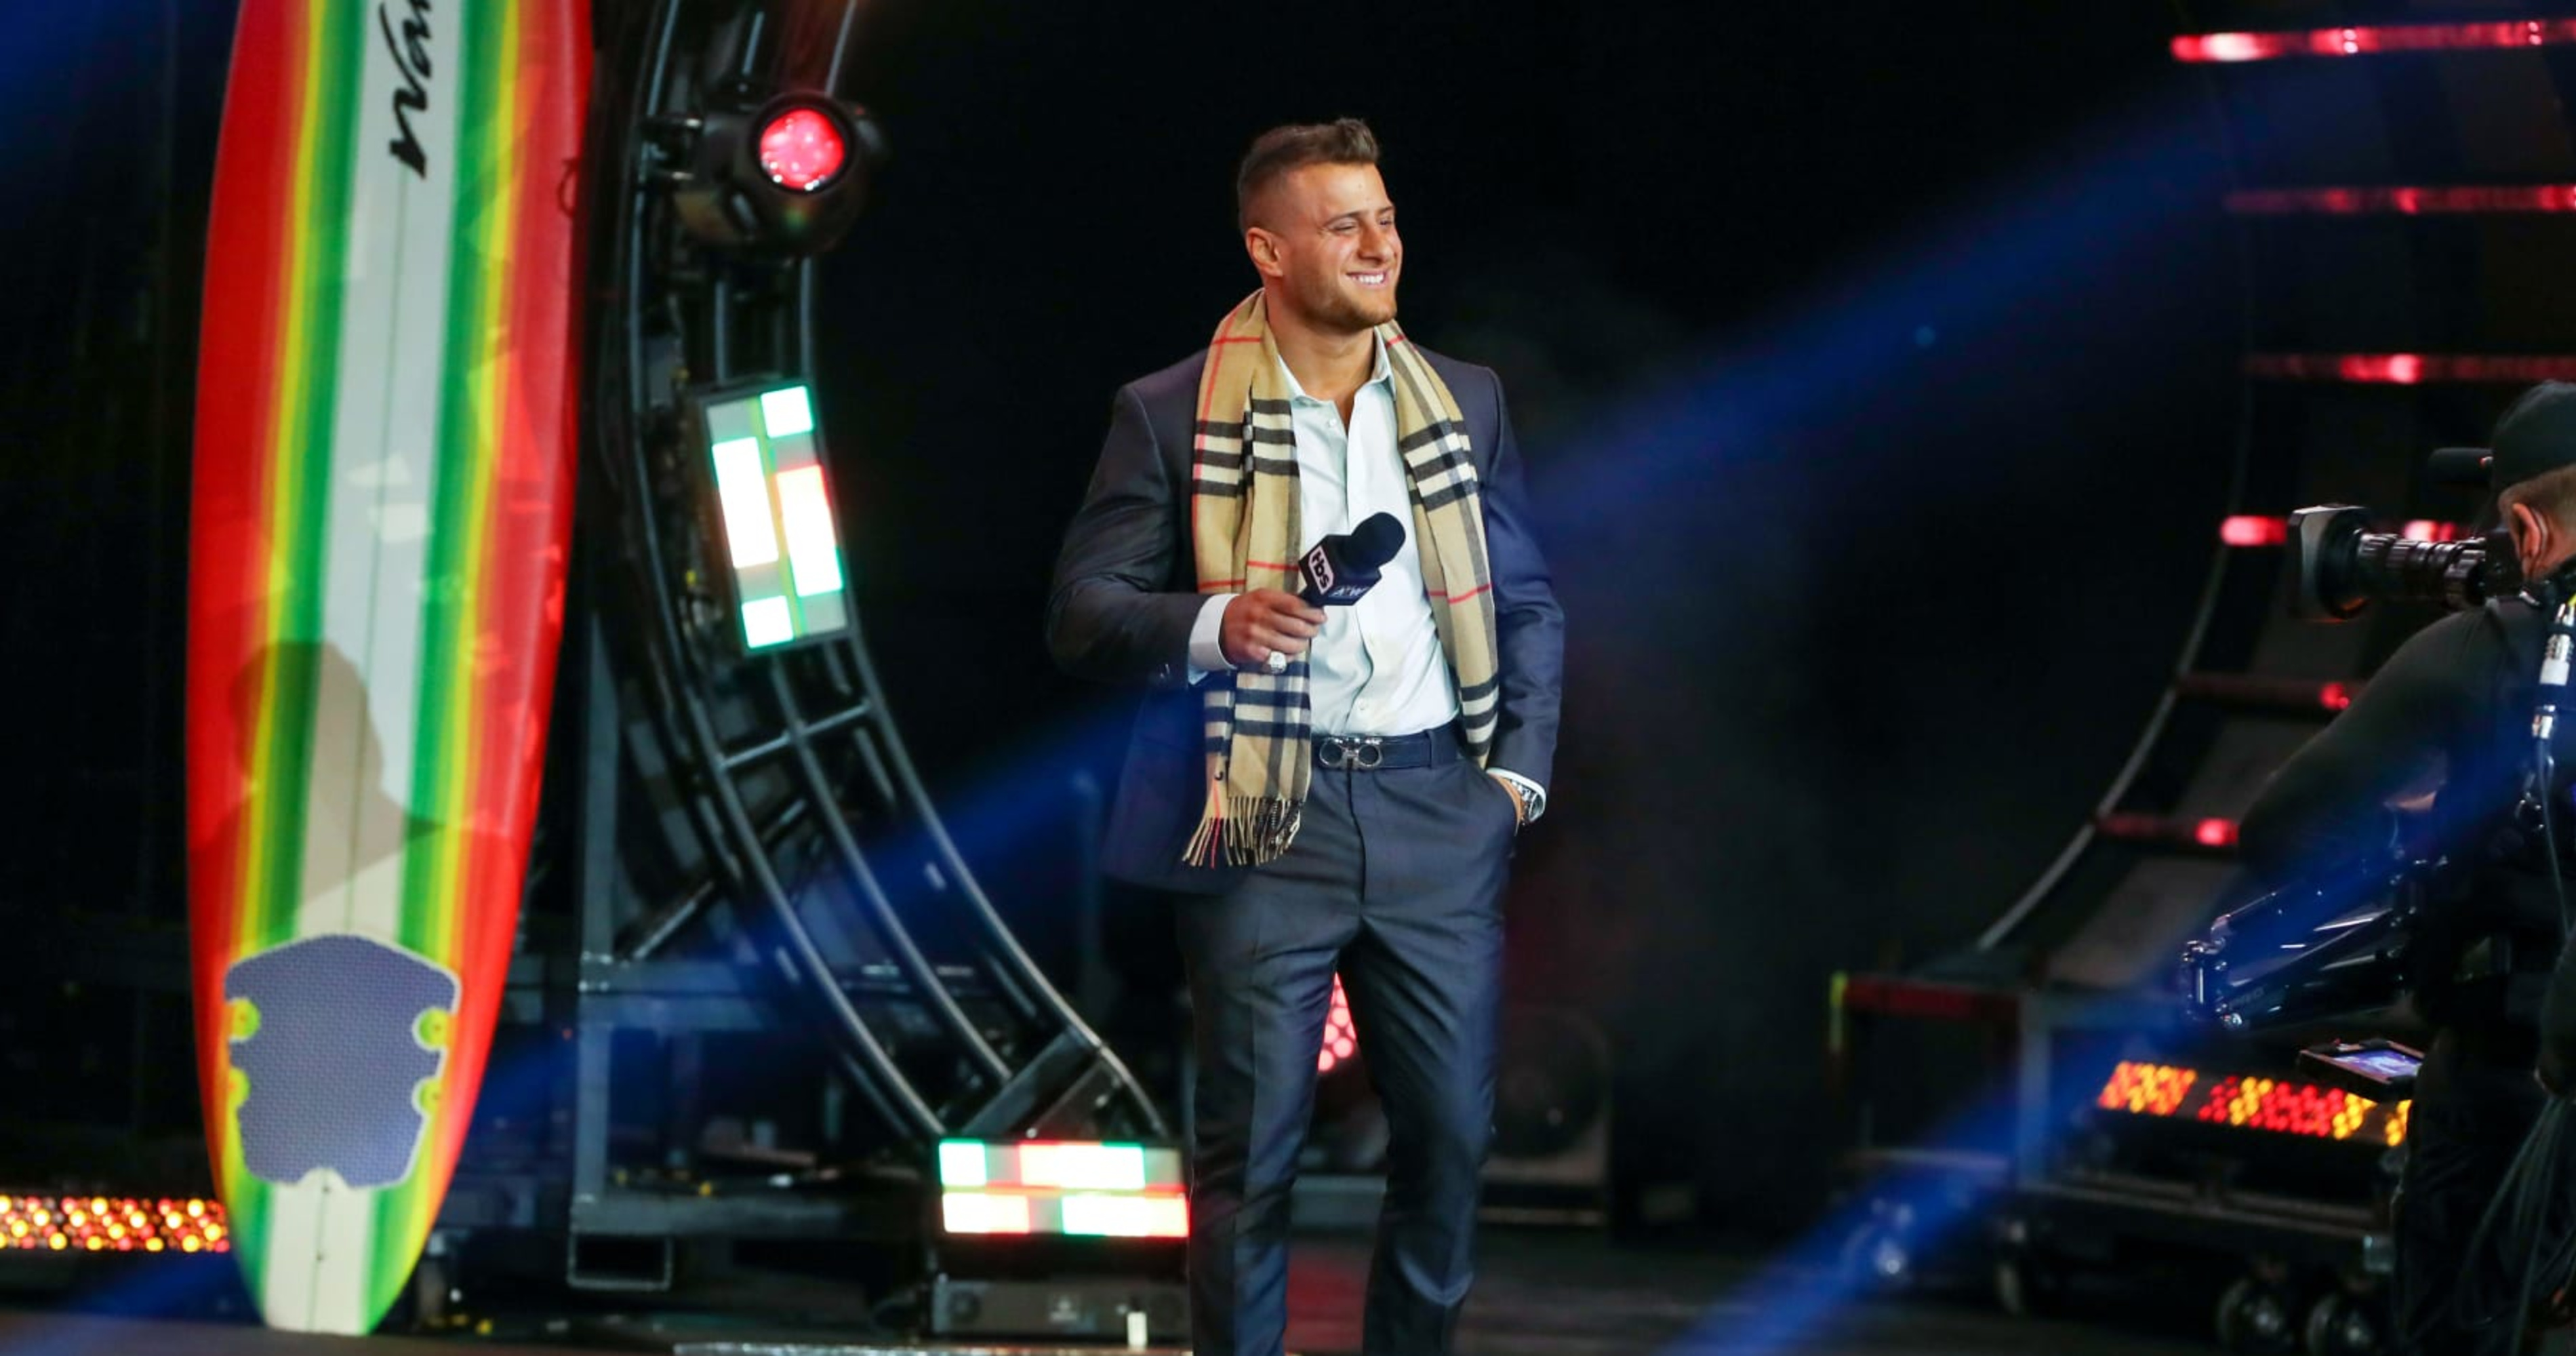 Backstage WWE and AEW Rumors: Latest on MJF, Ronda Rousey and More